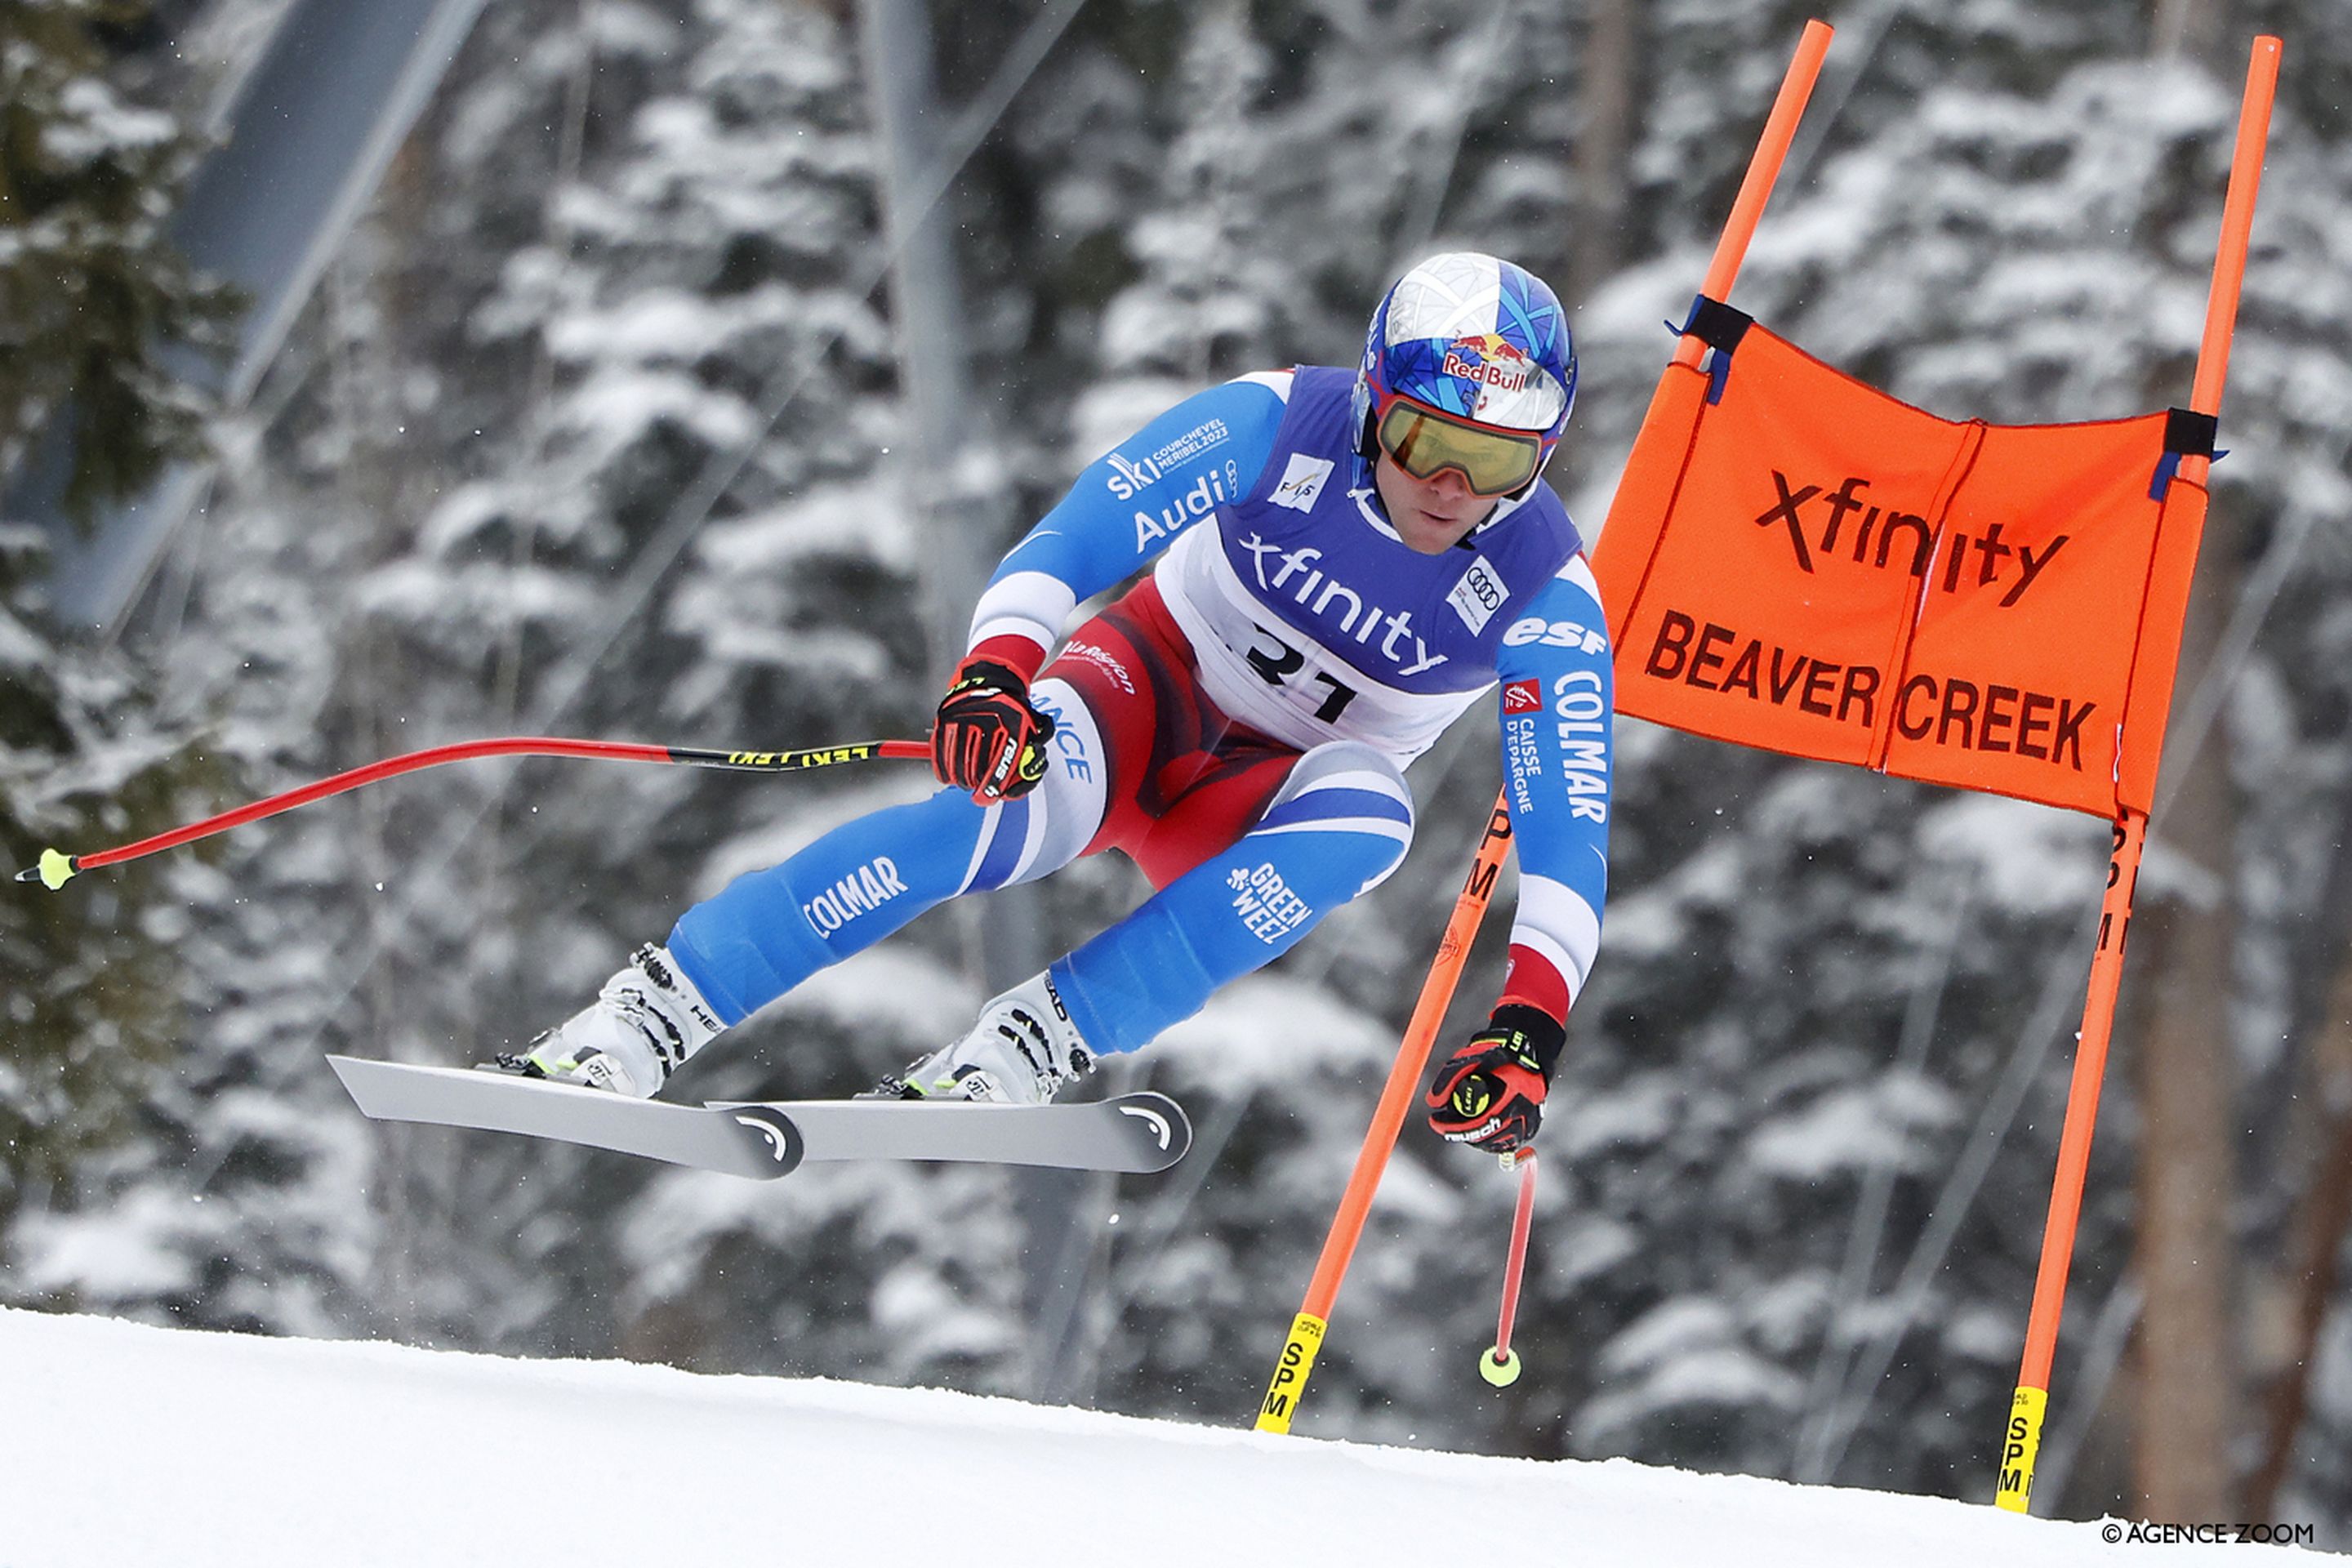 Does Pinturault have what it takes to excel in downhill this season?